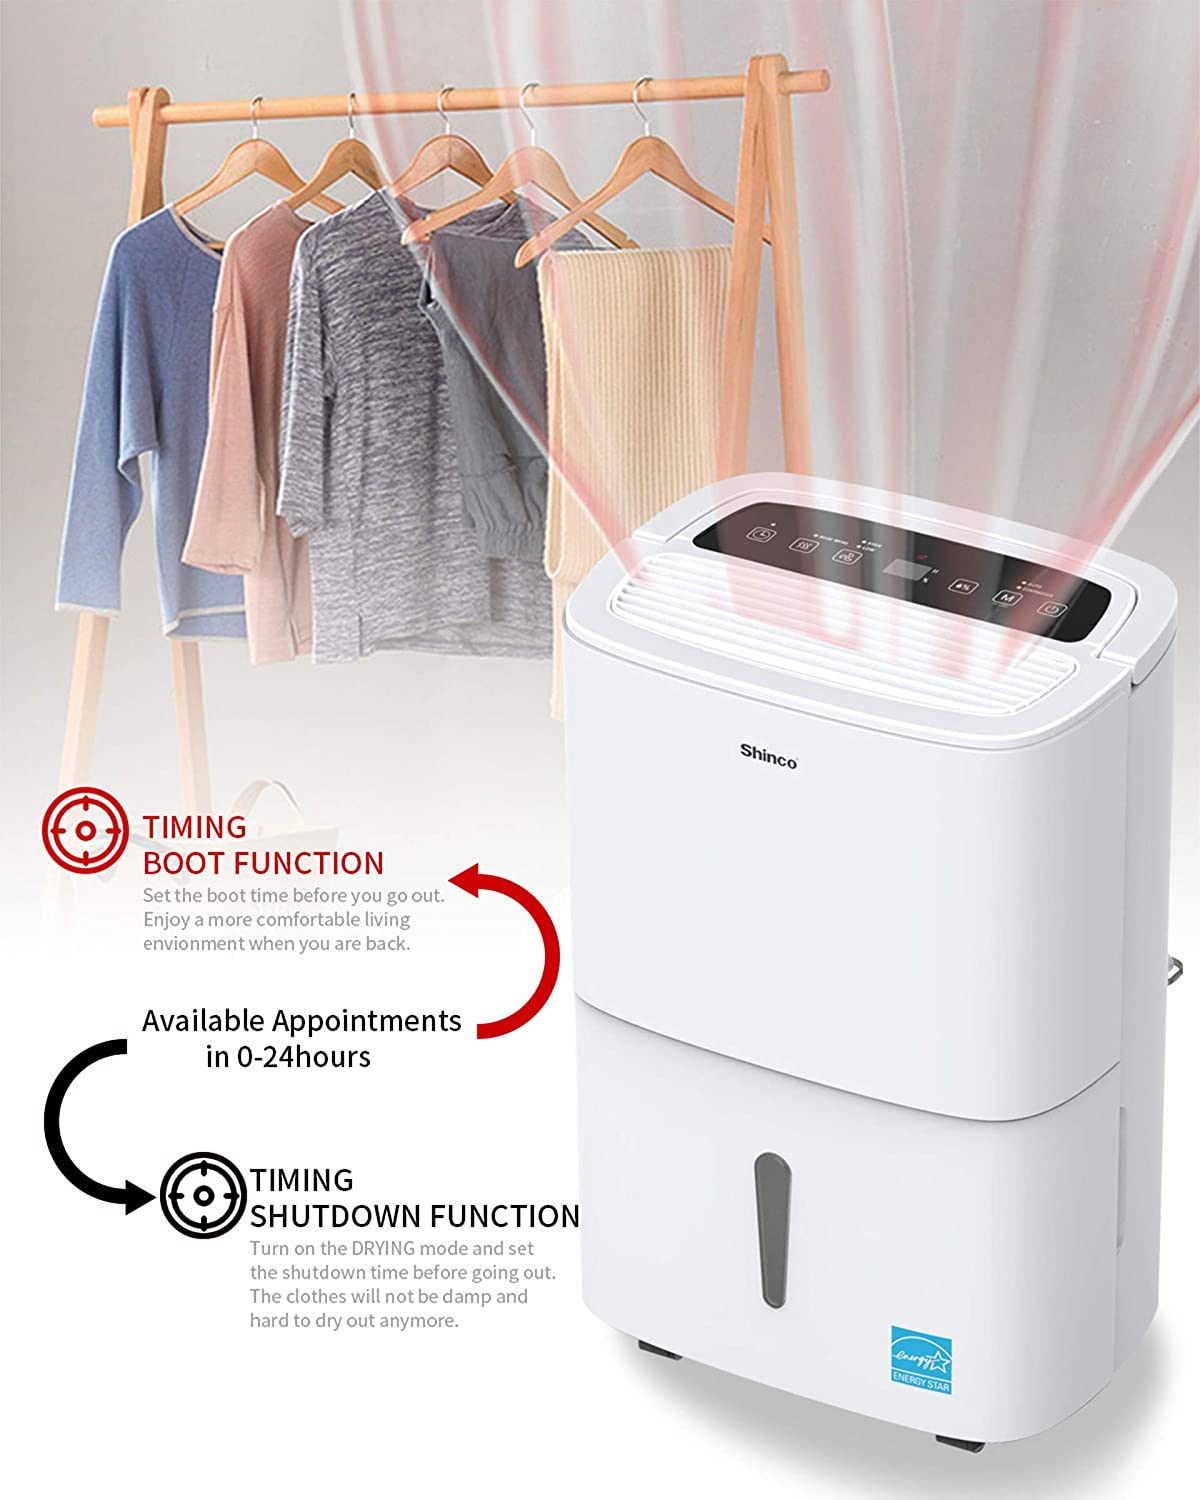 71N6swzuP8L. AC SL1500 10 BEST DEHUMIDIFIER WITH PUMP 2021 REVIEW AUTO-DRAIN